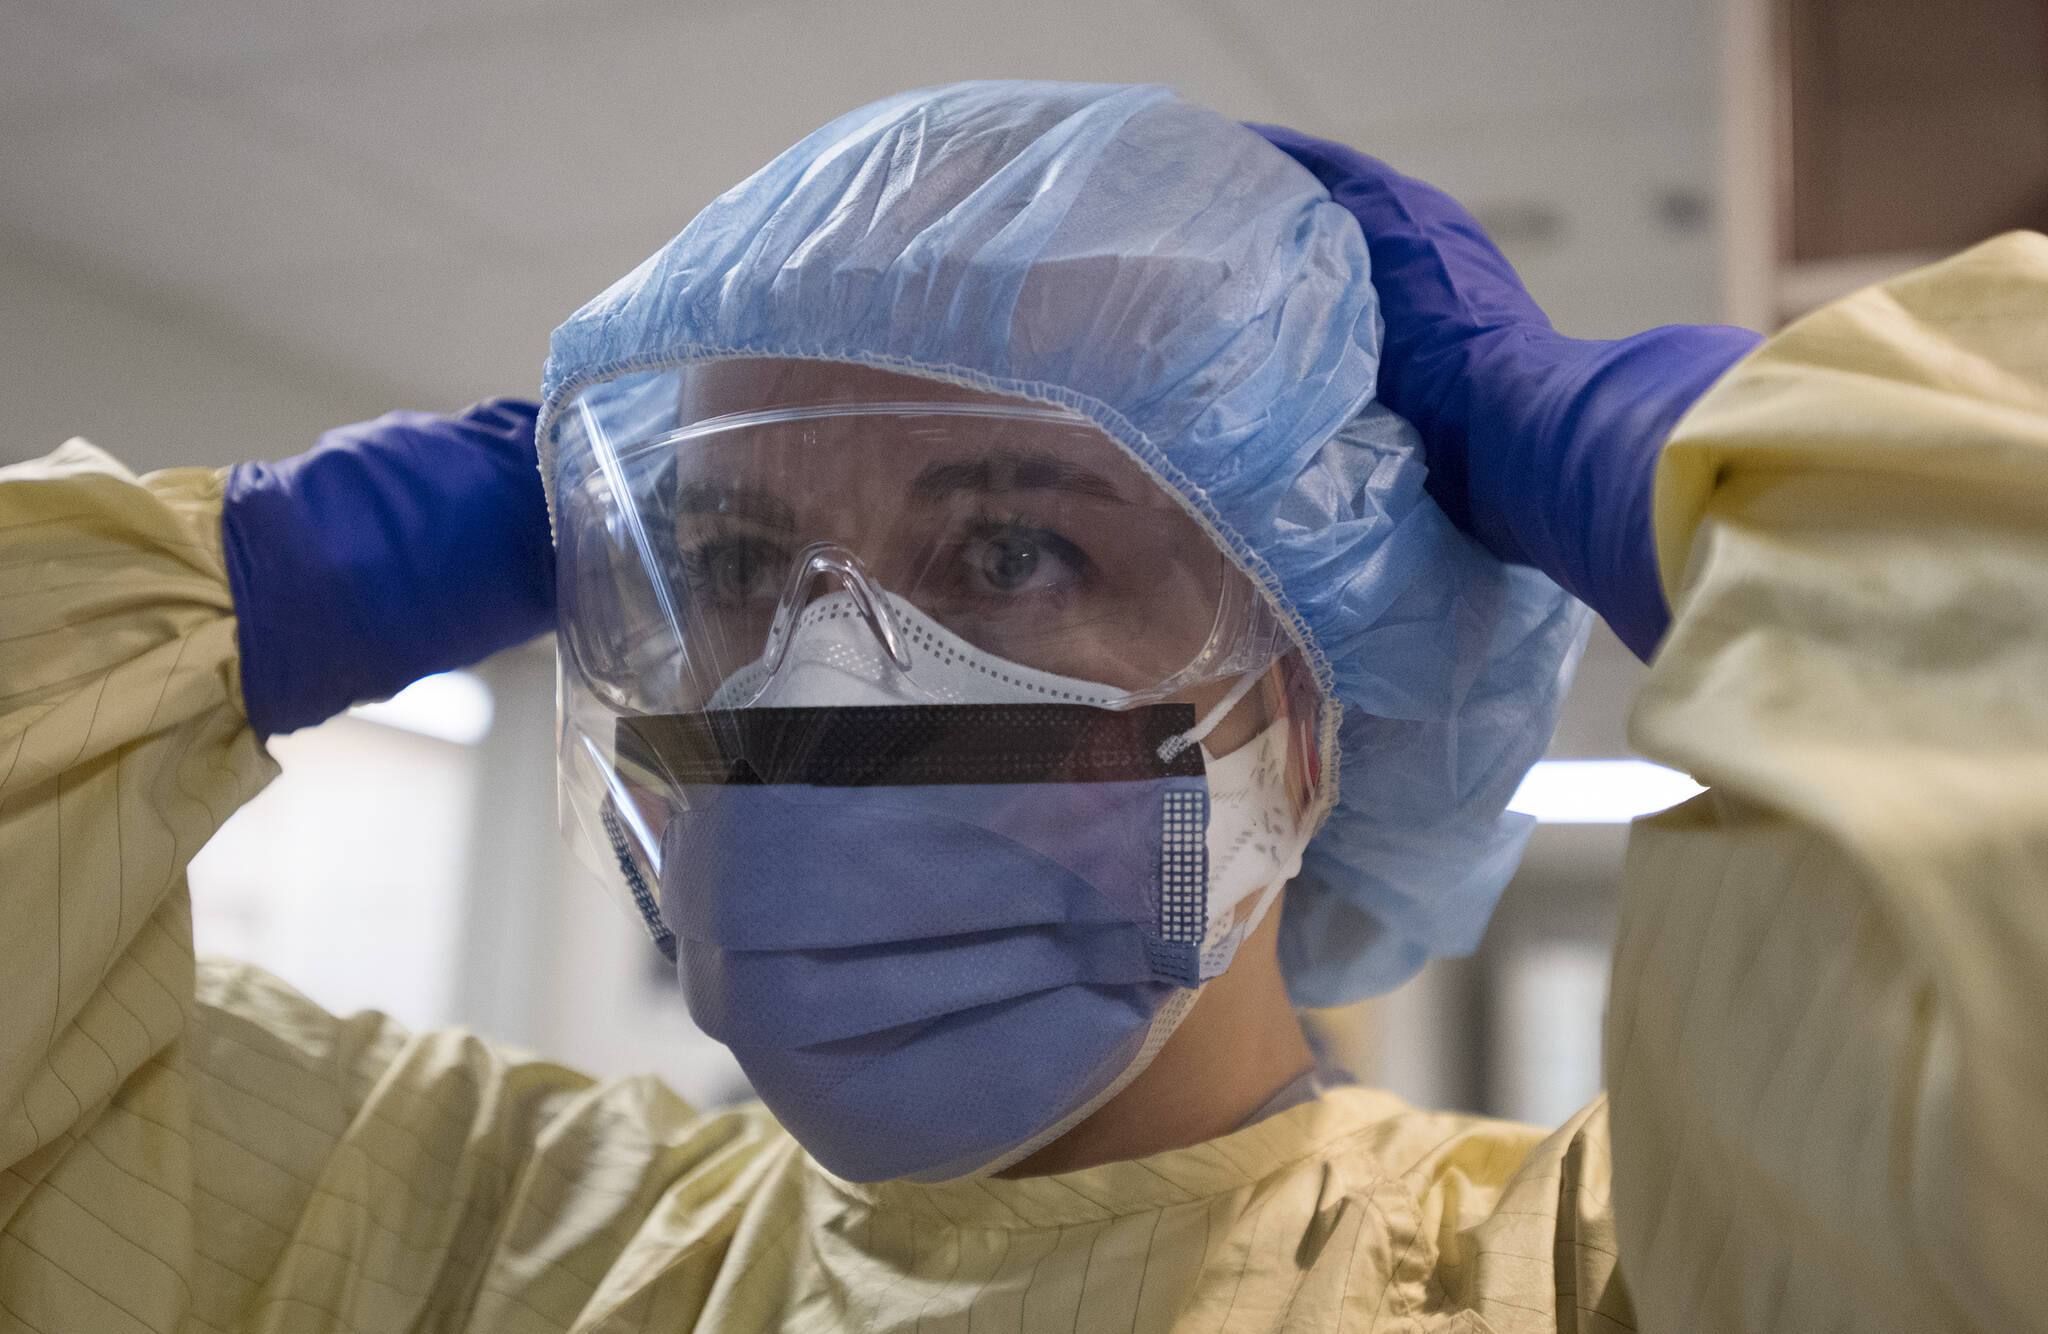 Registered nurse Cayli Hunt puts on her personal protective equipment prior to entering a COVID positive room in the COVID-19 intensive care unit at St. Paul’s hospital in downtown Vancouver, Tuesday, April 21, 2020. THE CANADIAN PRESS/Jonathan Hayward